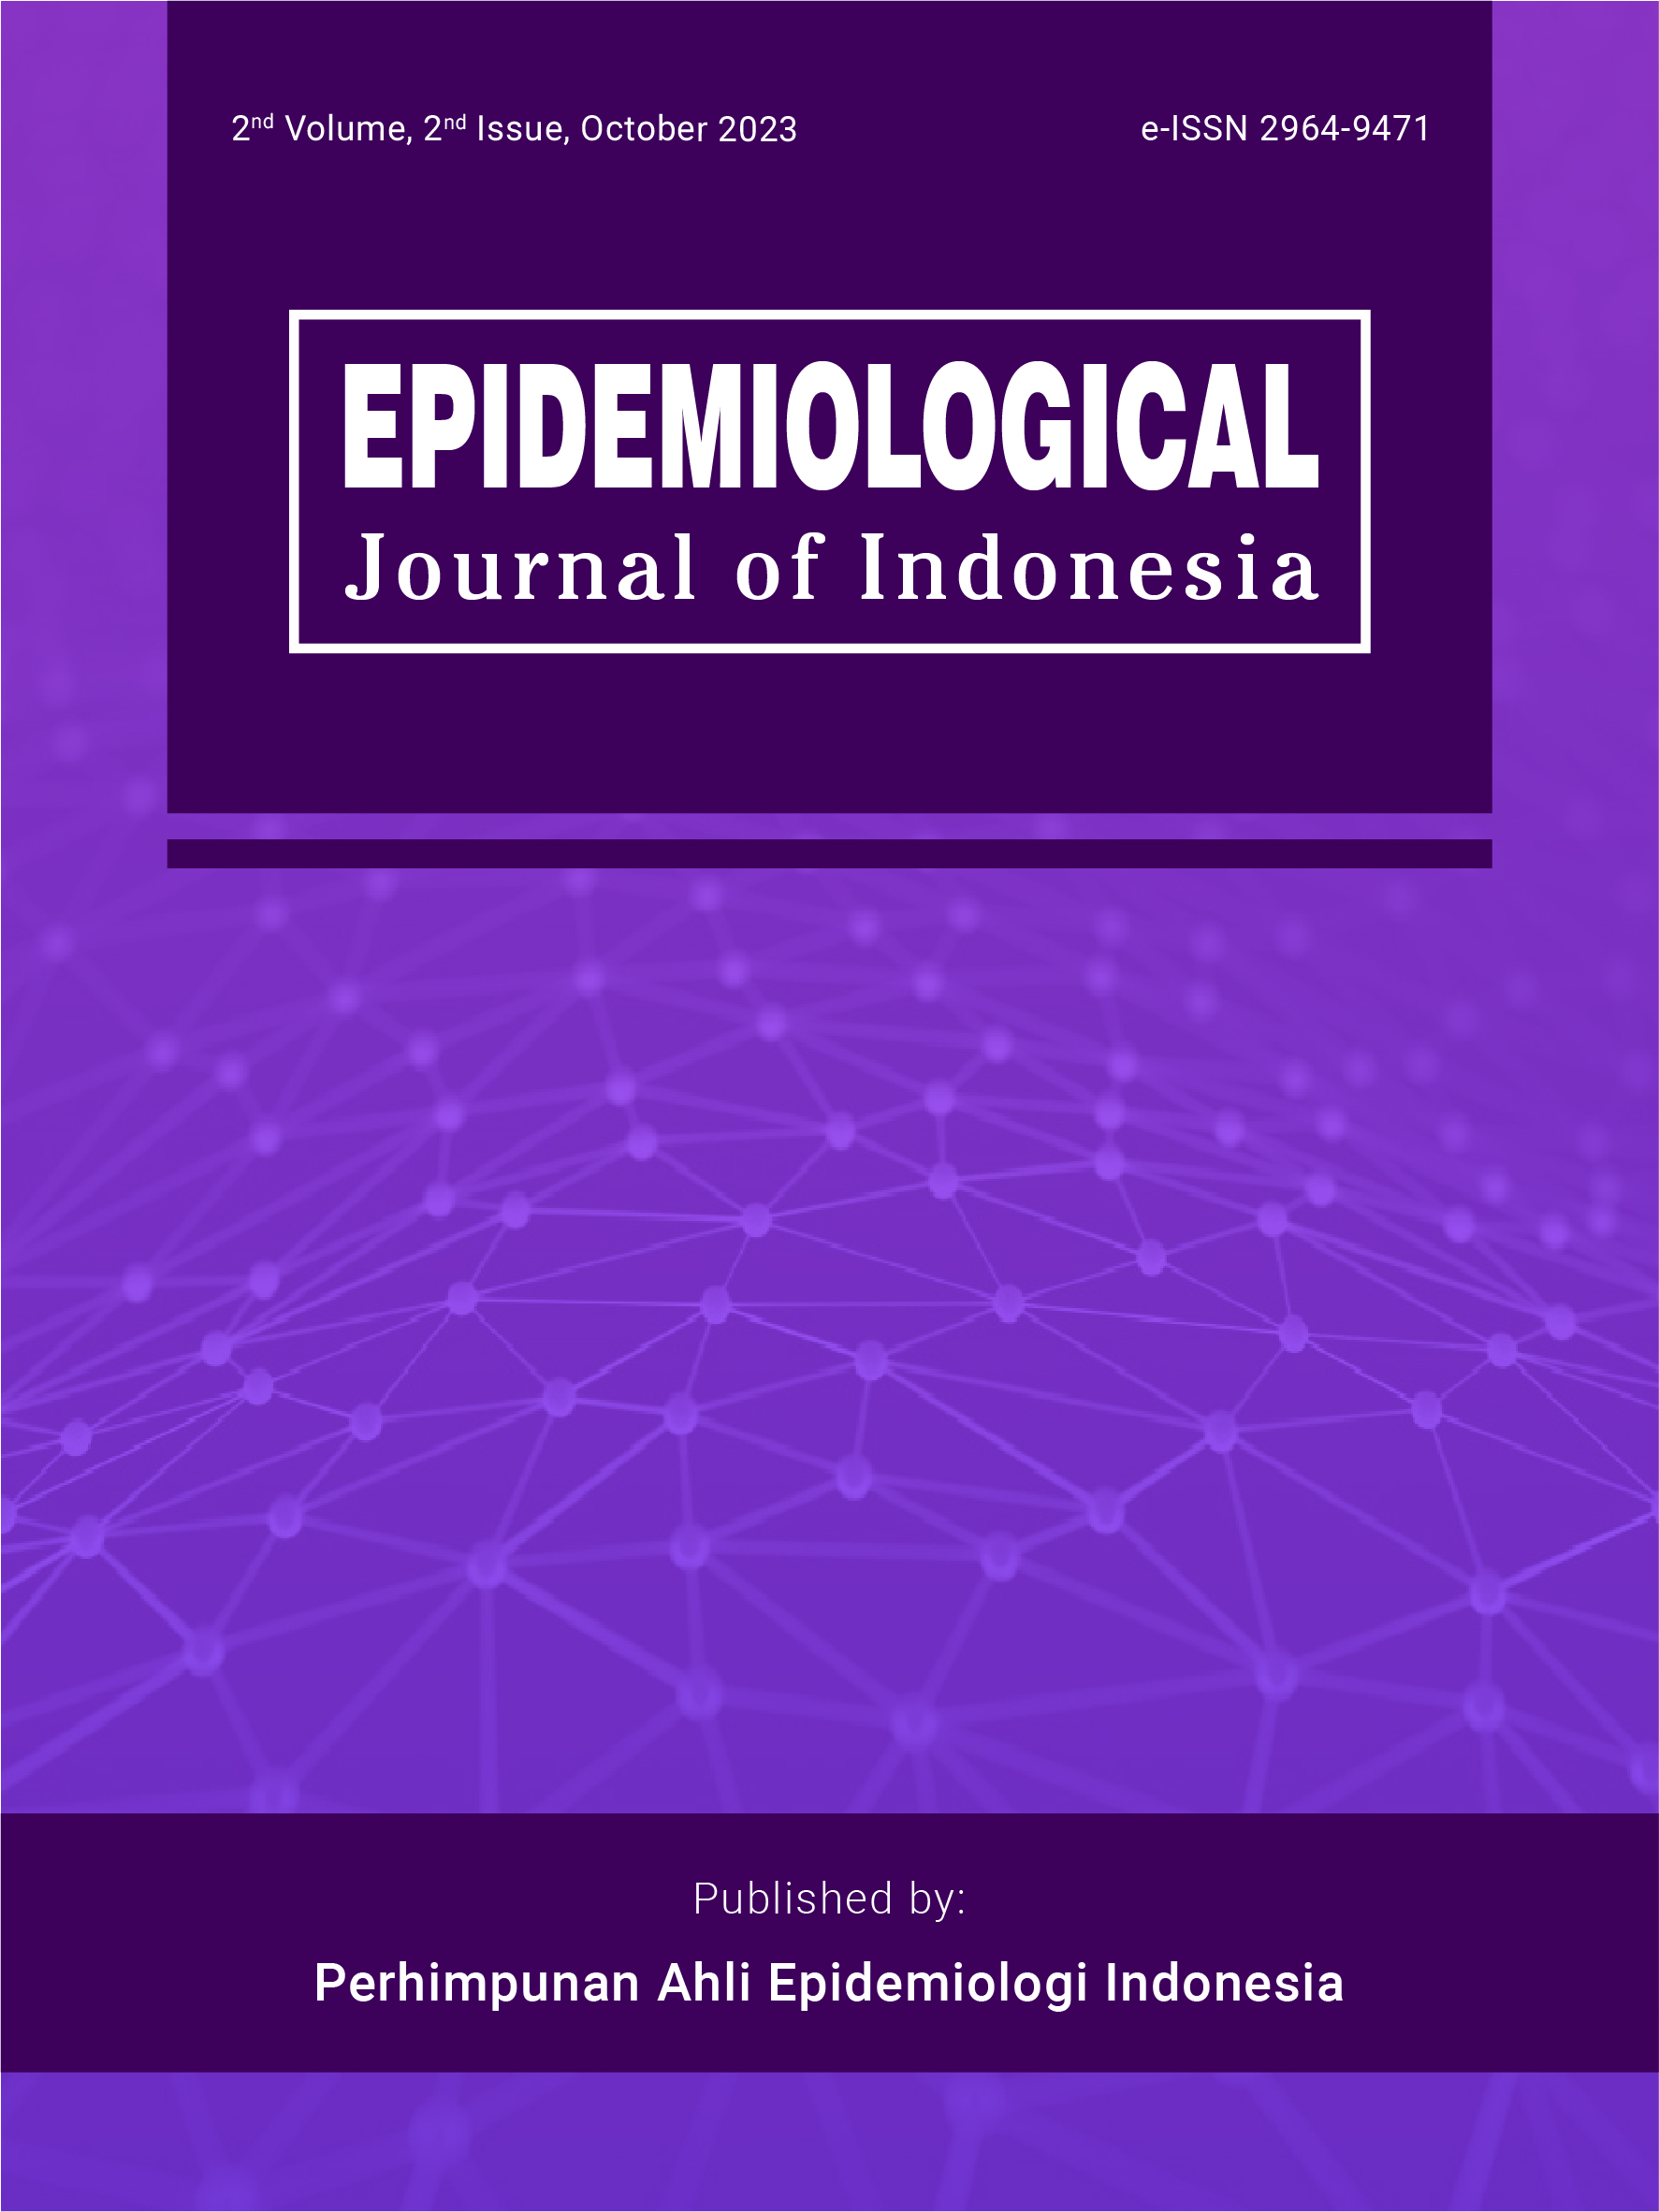 					View Vol. 2 No. 2 (2023): Epidemiological Journal of Indonesia
				